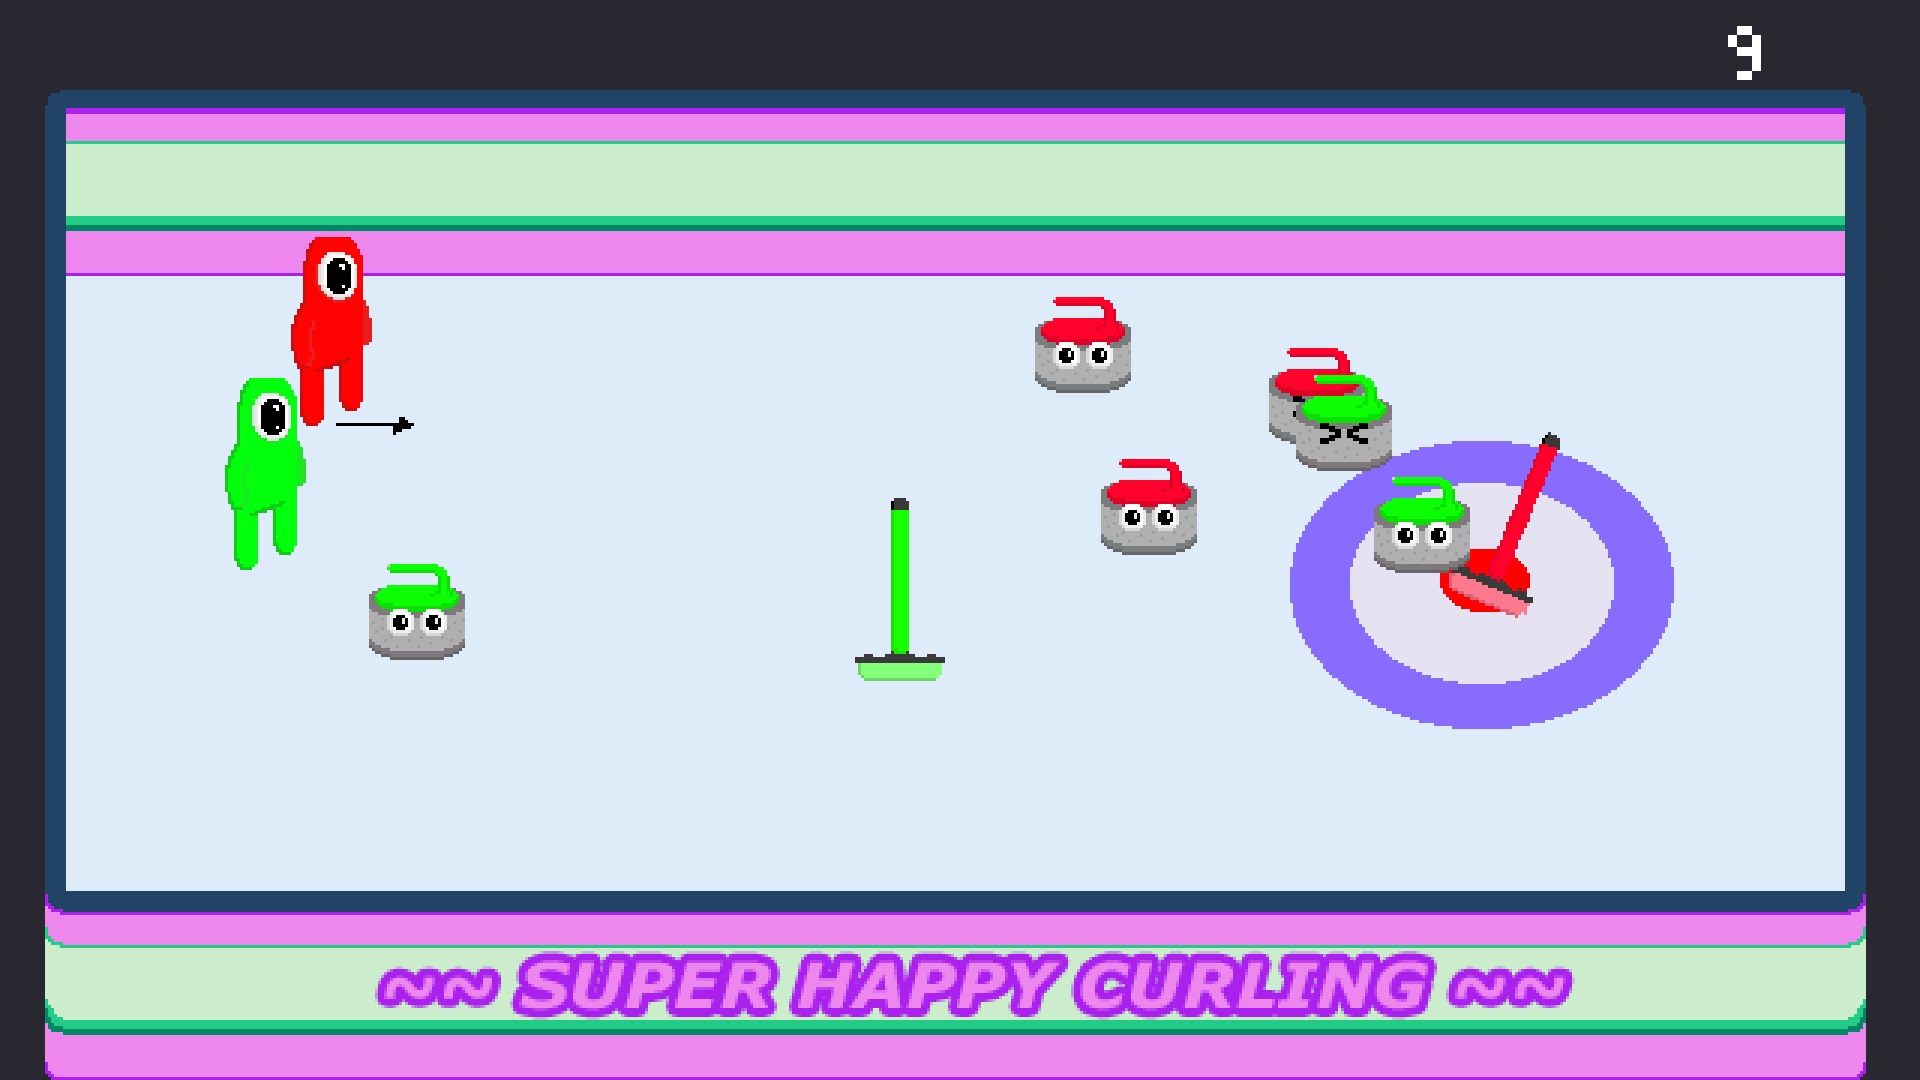 Super Happy Curling by Zhamul, juleswhatevs